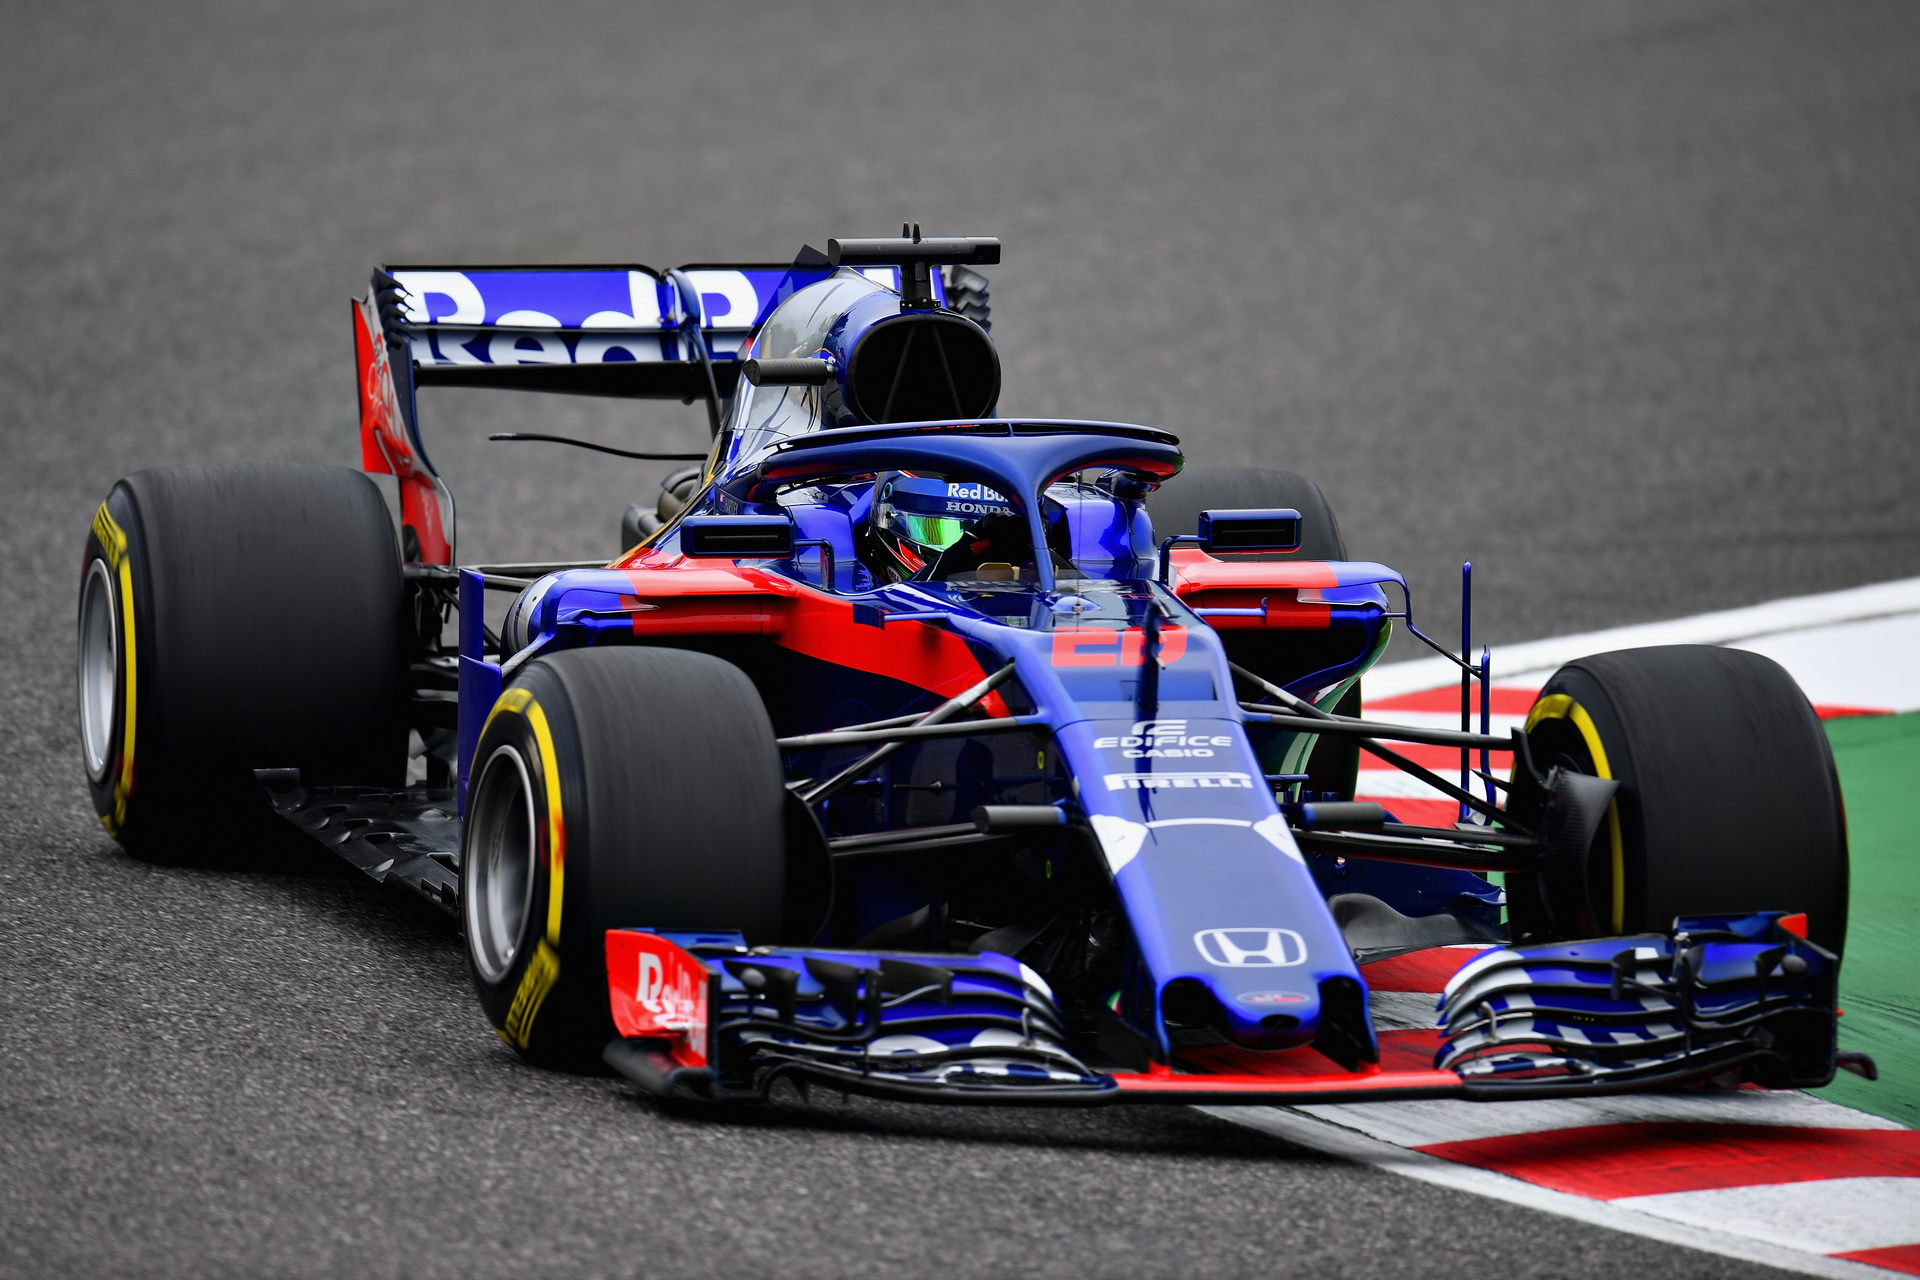 Latest Honda Upgrade For Toro Rosso Could Give Red Bull Wings | Carscoops